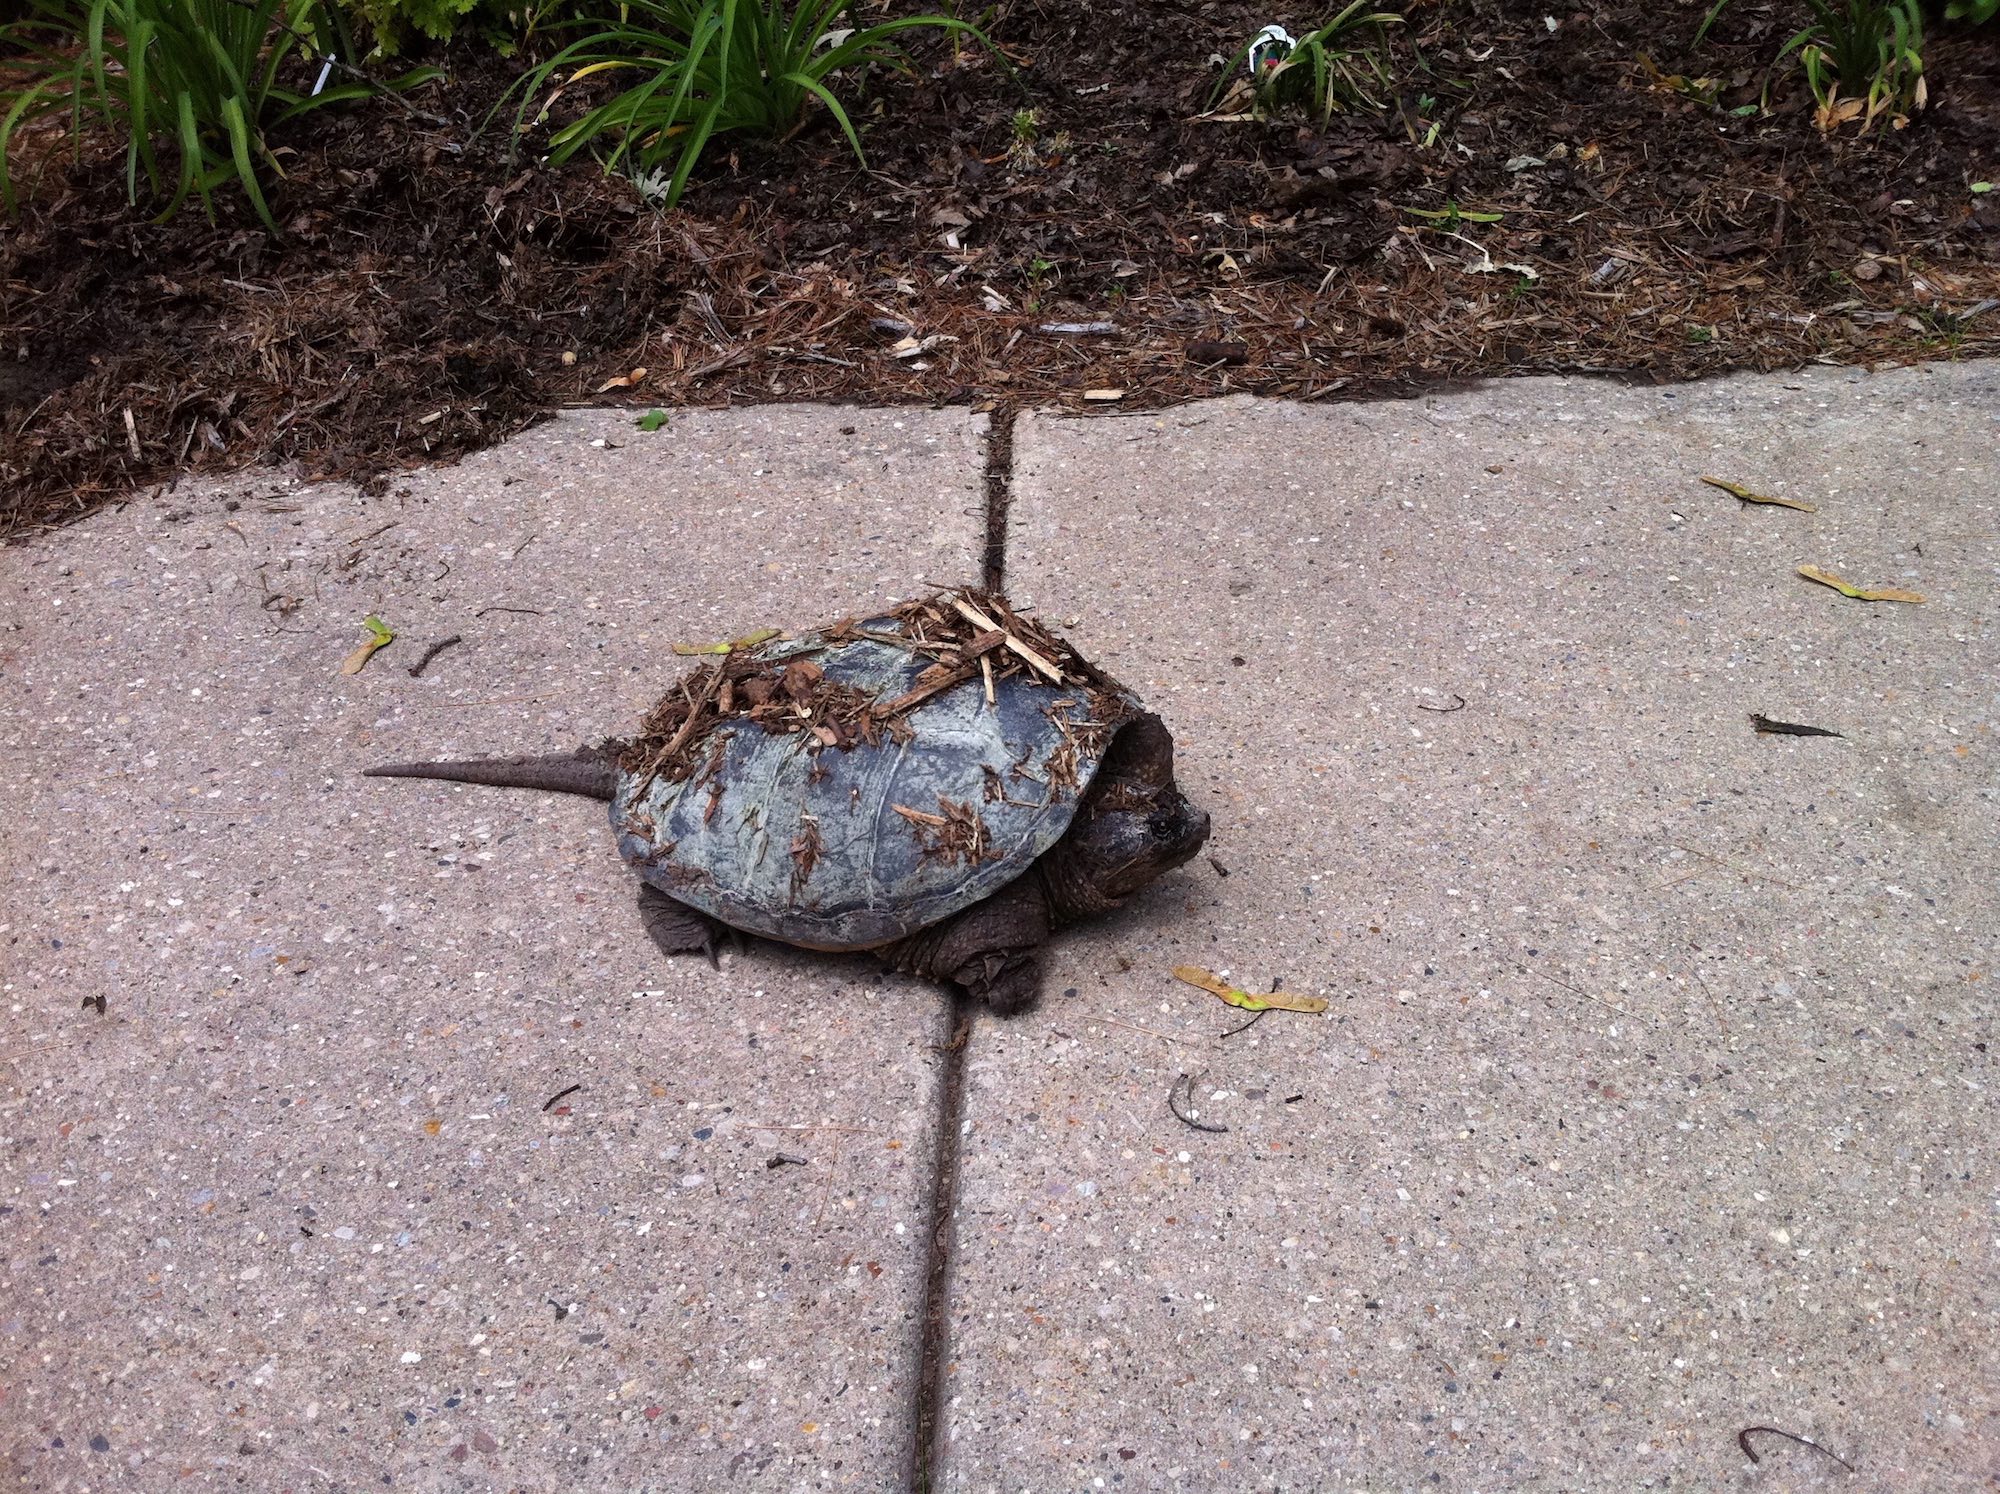 Snapping Turtle on Arbor Drive driveway across from Ho-Nee-Um Pond on Lake Wingra in Madison, Wisconsin on May 26, 2012.